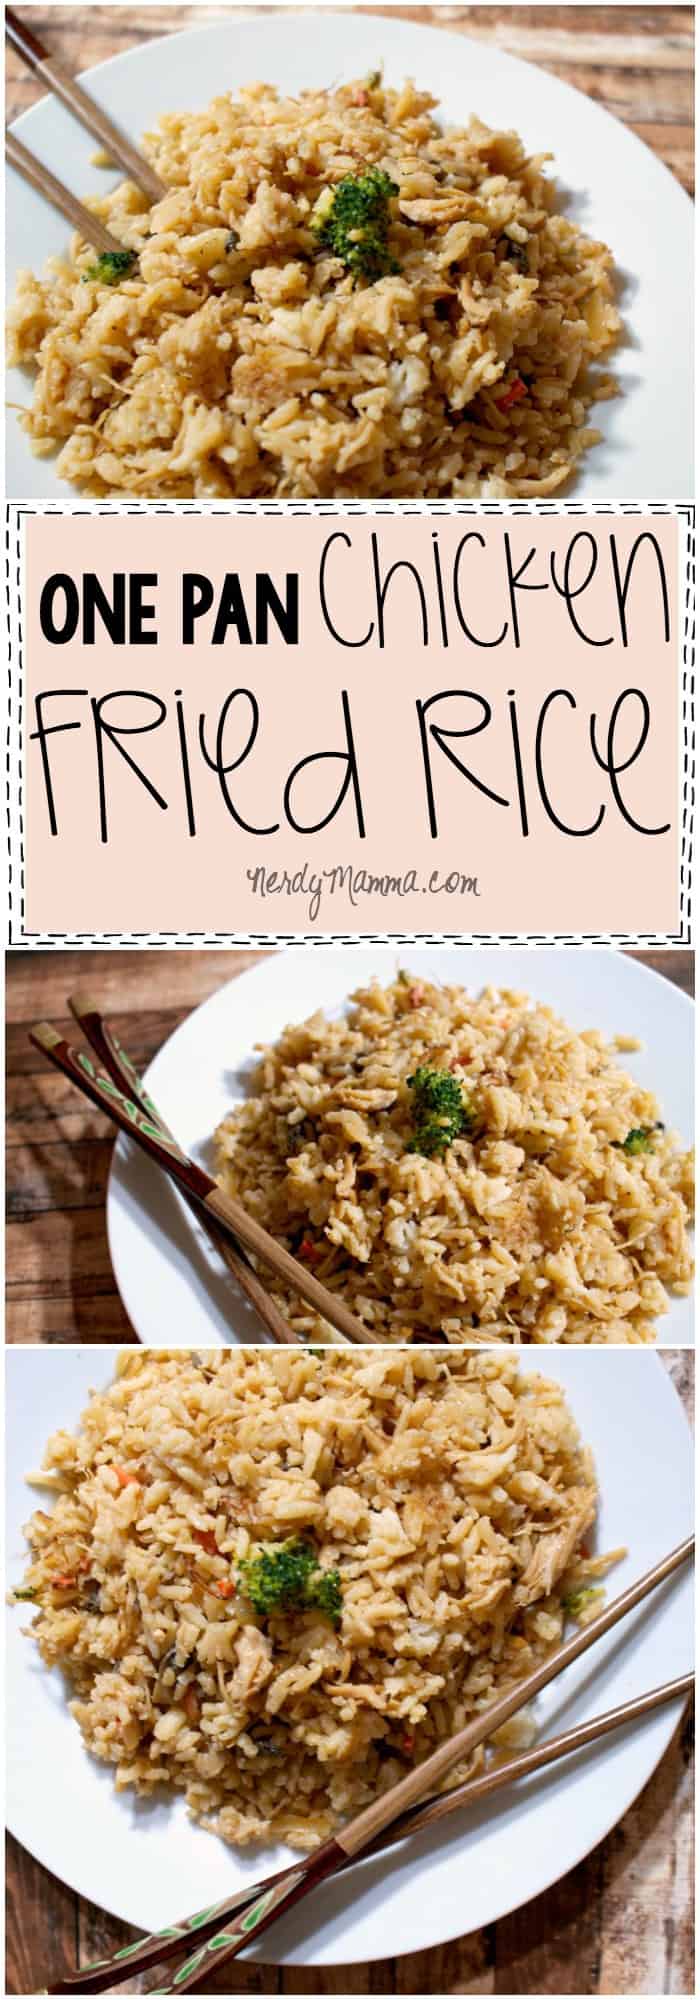 I absolutely LOVE this recipe for One Pan Chicken Fried Rice. So fast and my family thinks it's just like take-out! LOL!